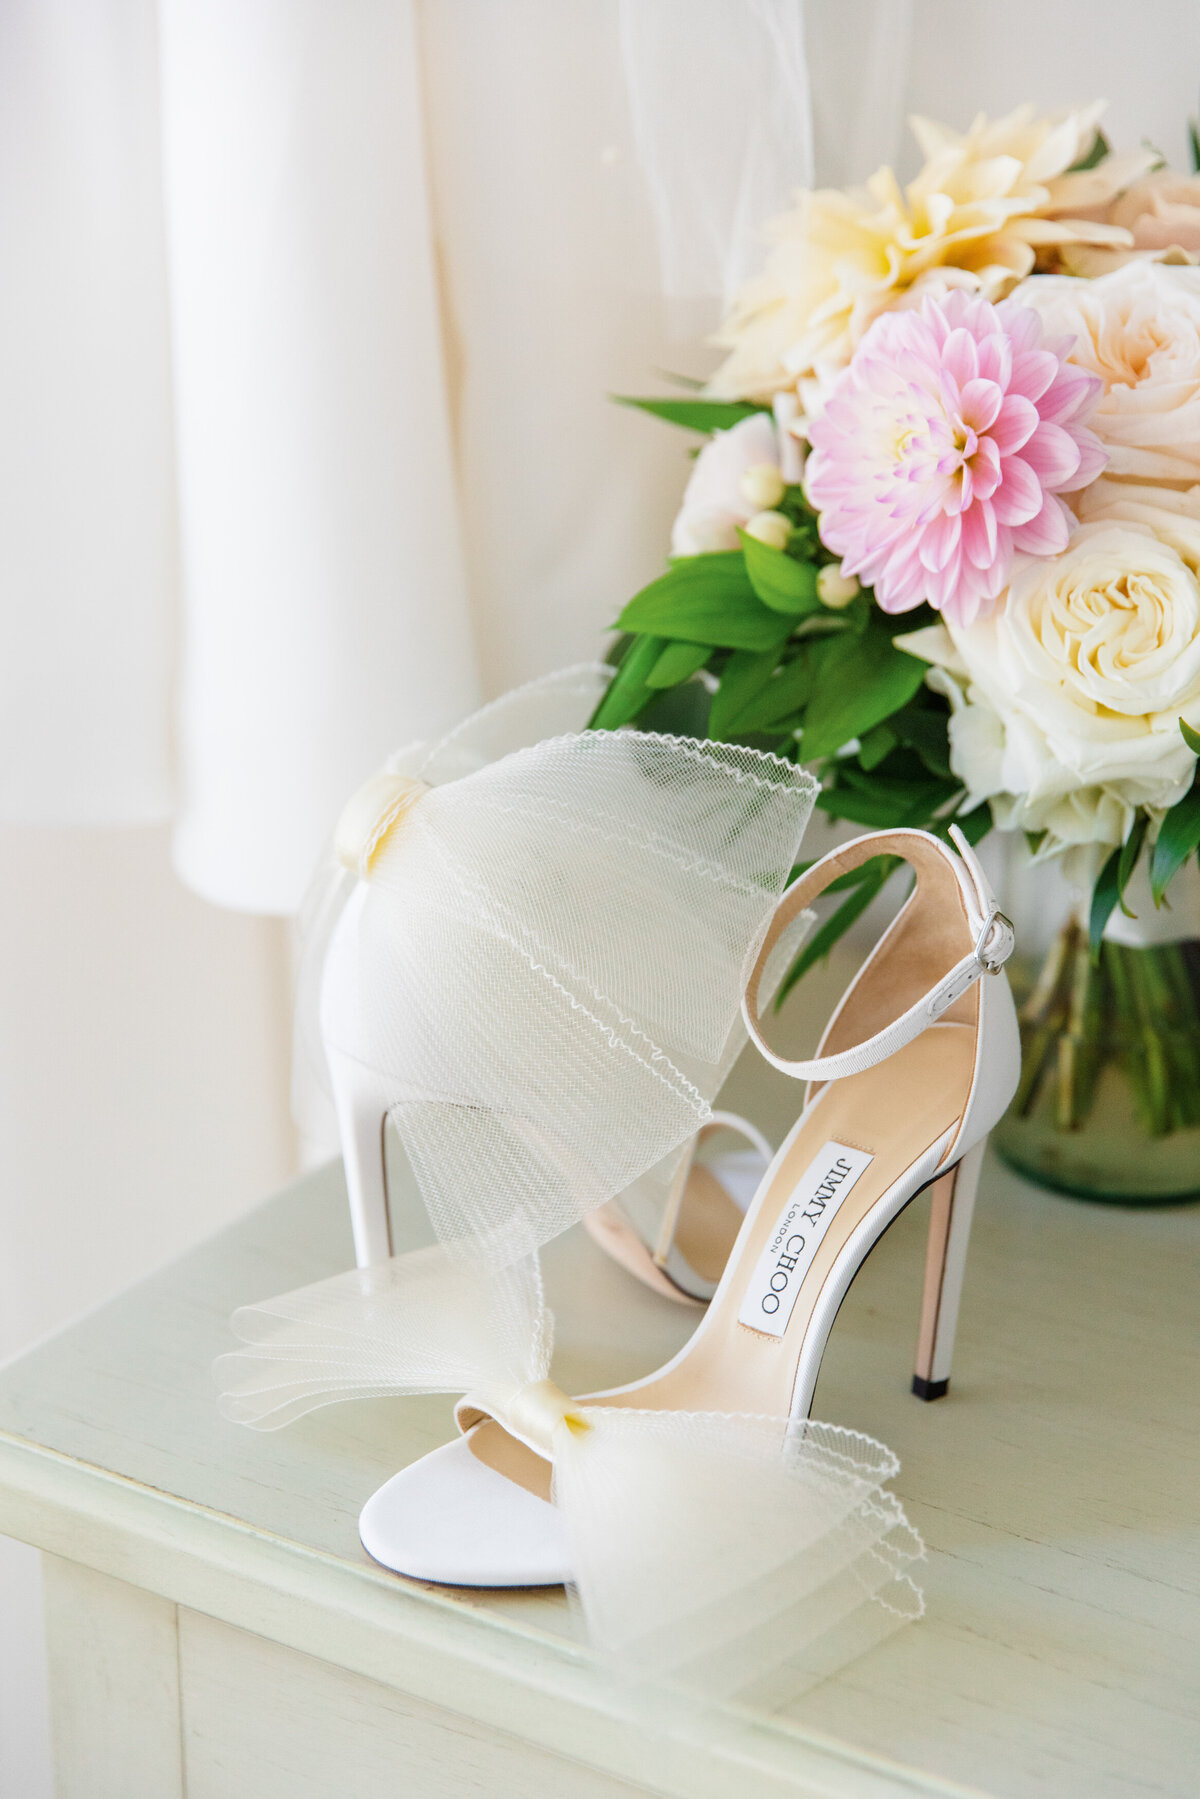 jimmy choo bow shoes styled with bride's bouquet and dress